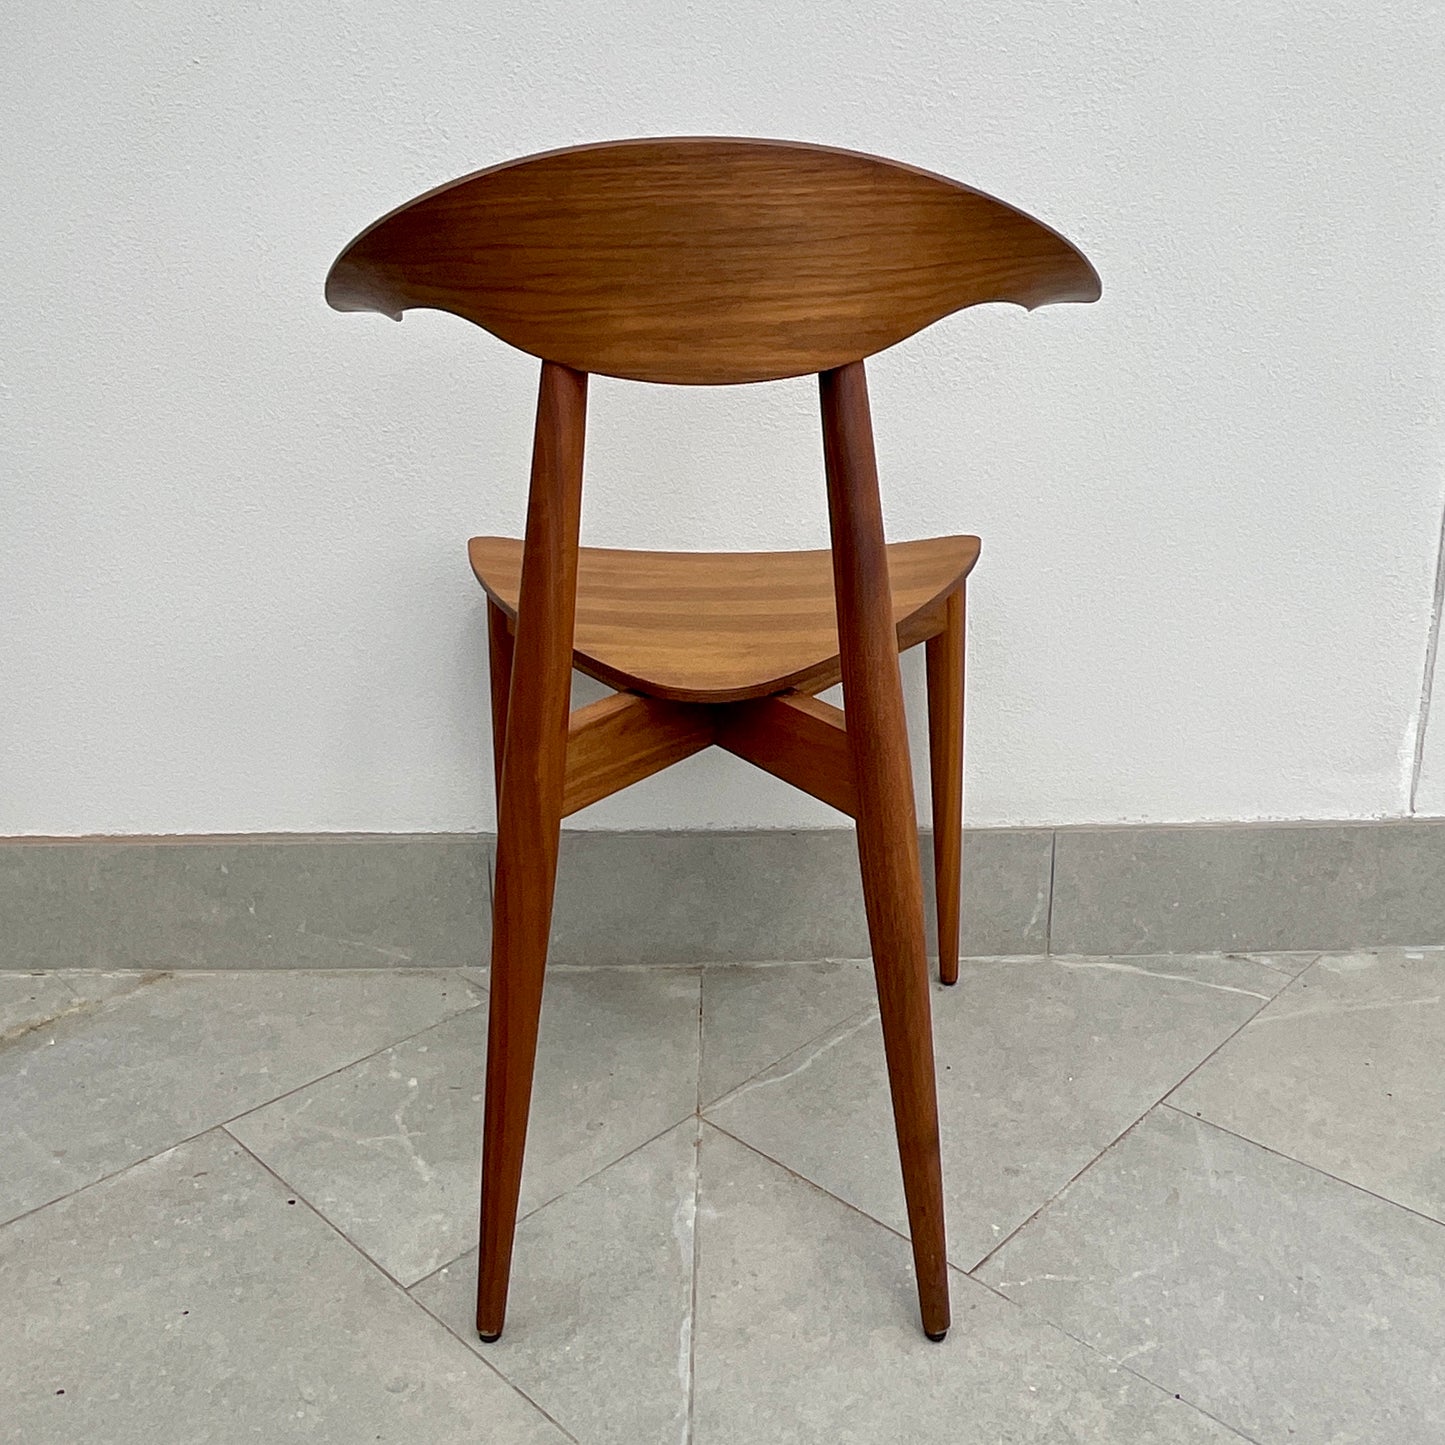 Load image into Gallery viewer, Manta Dining Chair by Matthew Hilton for De La Espada (2 available)
